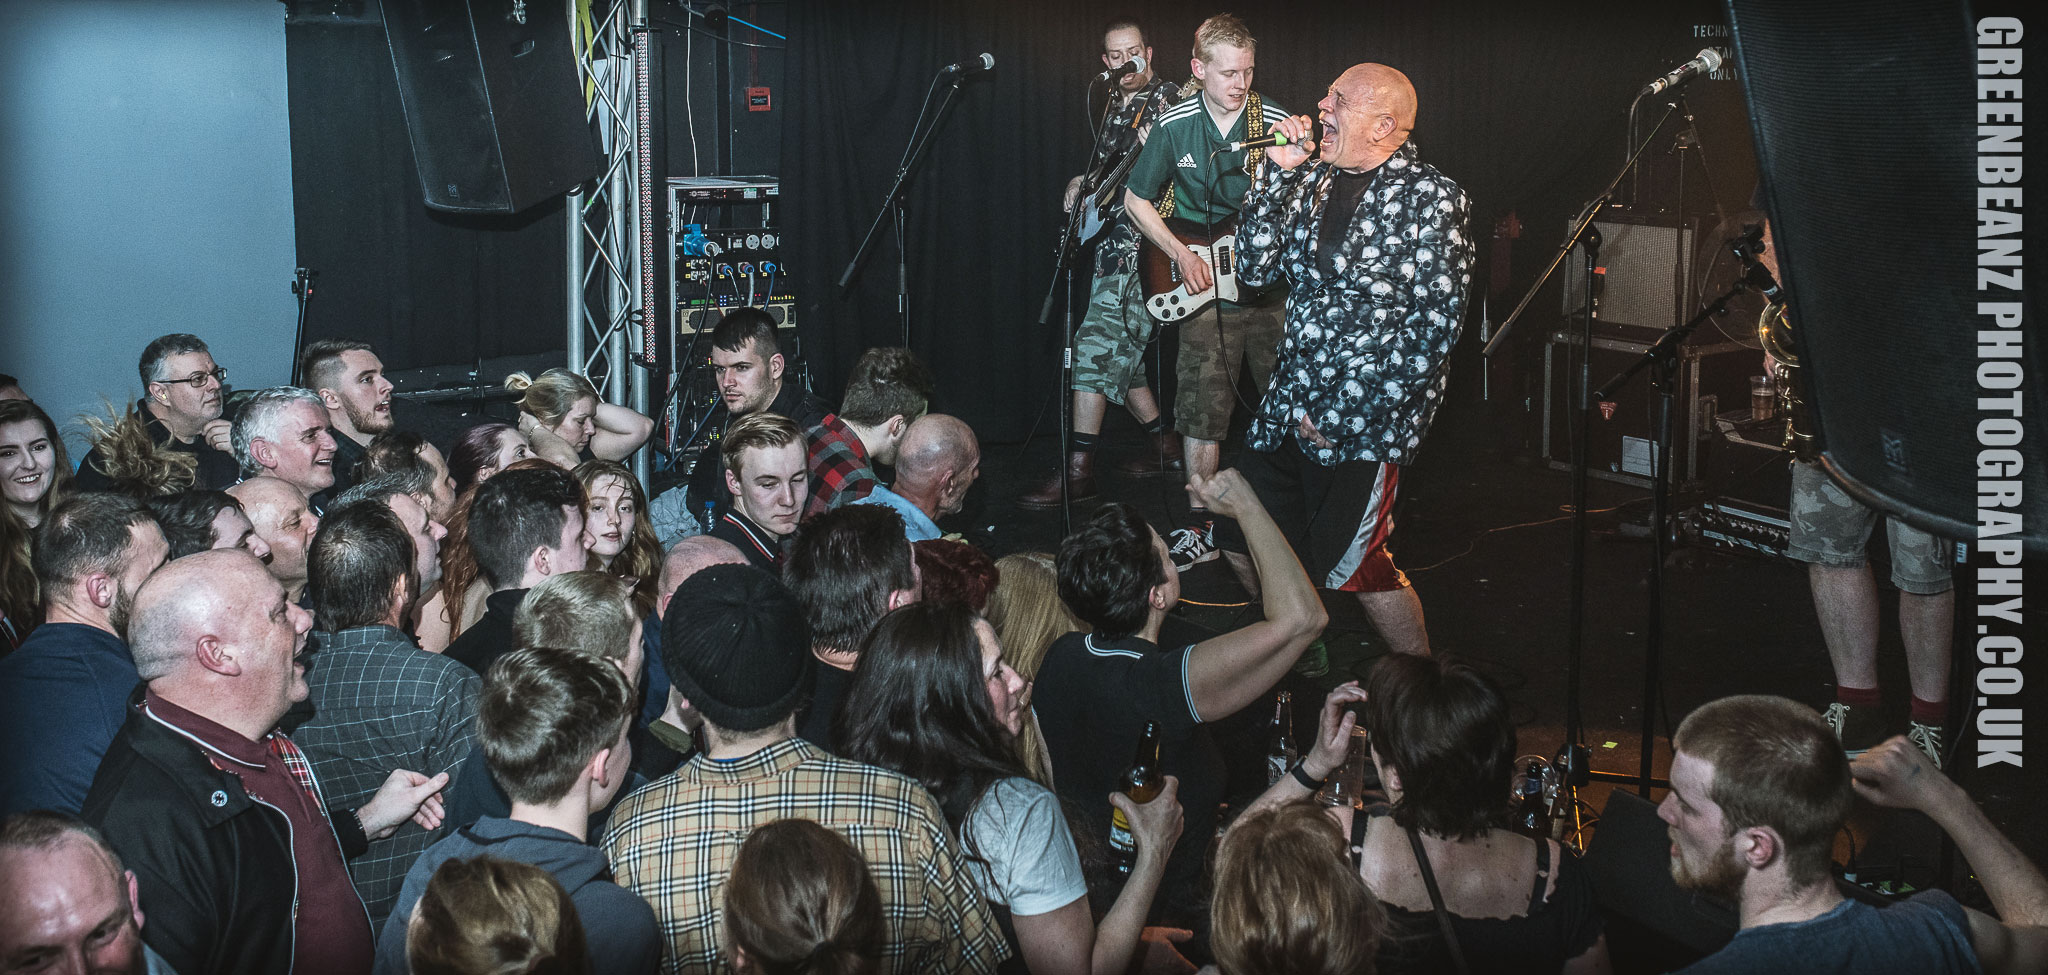 Bad Manners UK SKA legends live at The Hub Plymouth